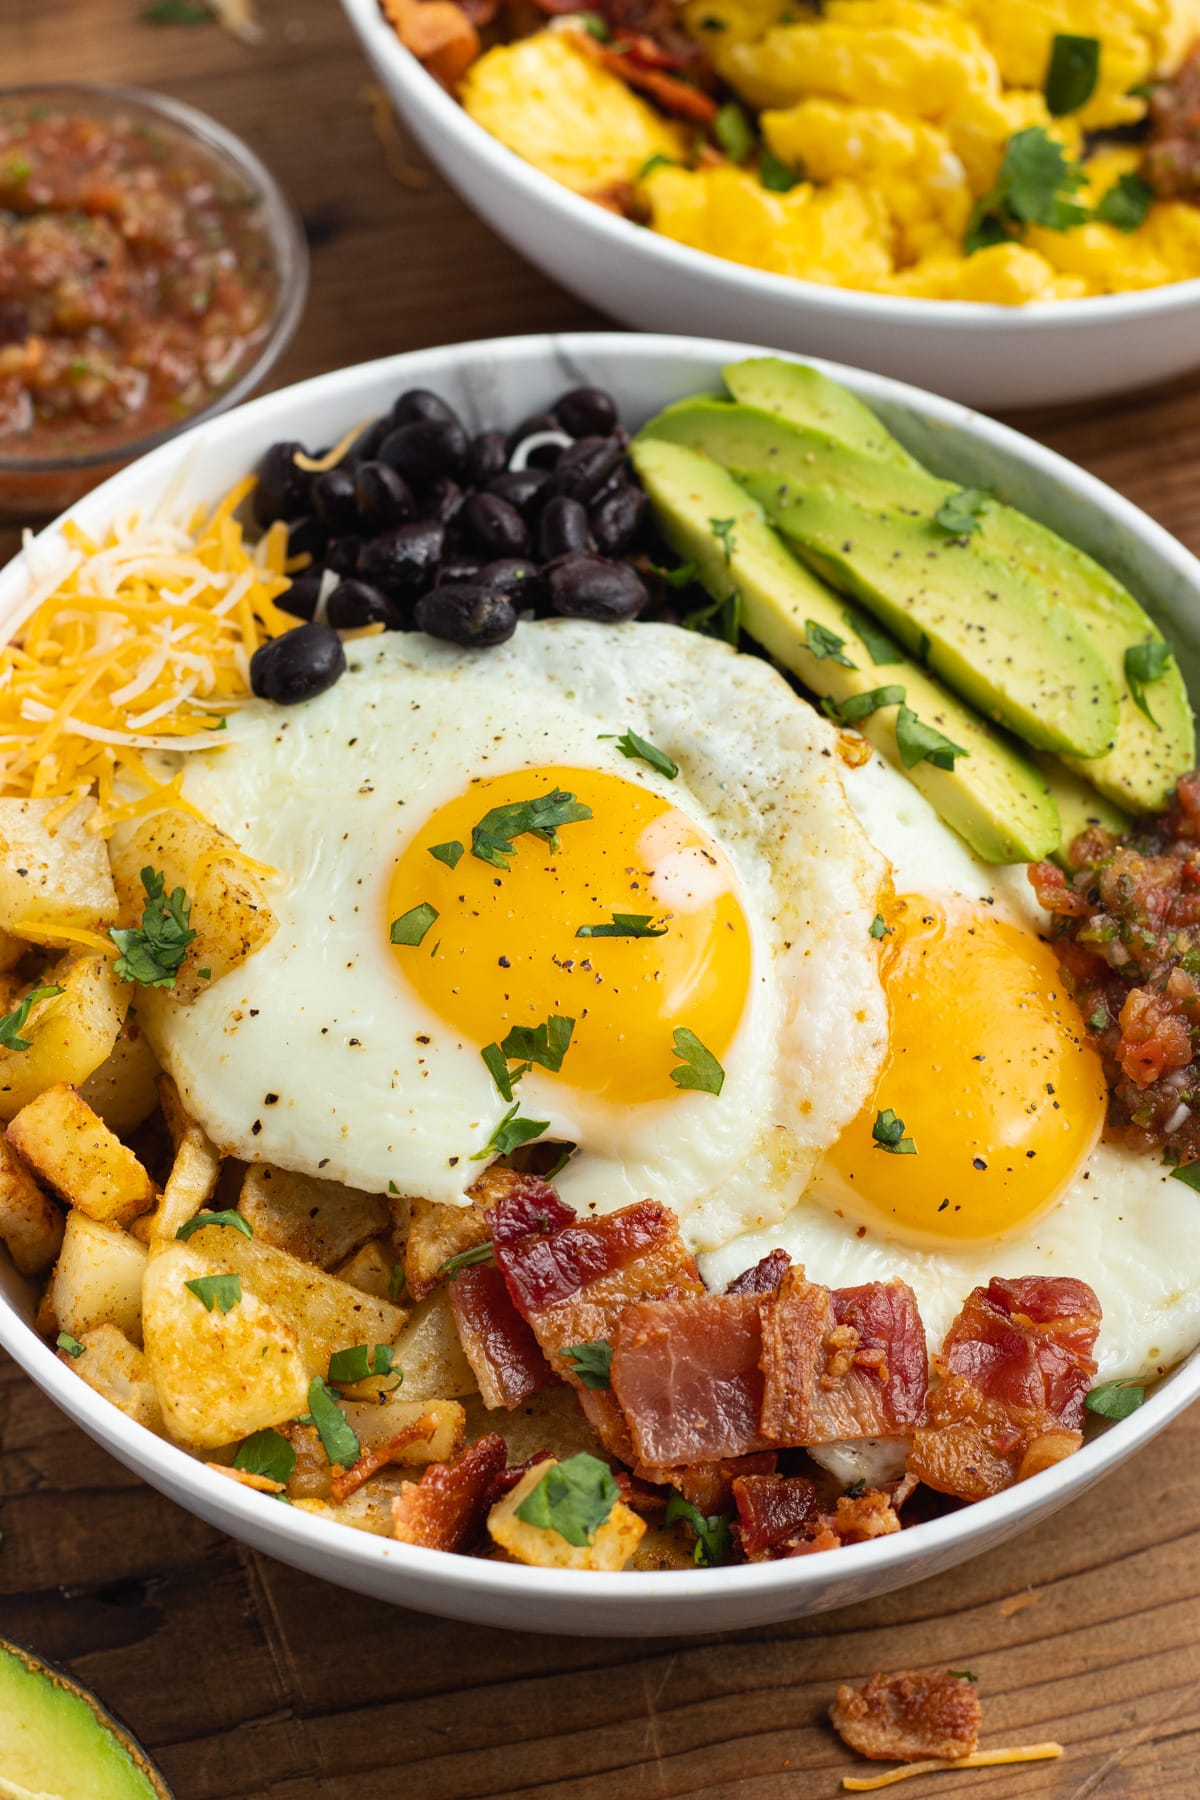 This is a picture of a breakfast bowl with fried eggs.